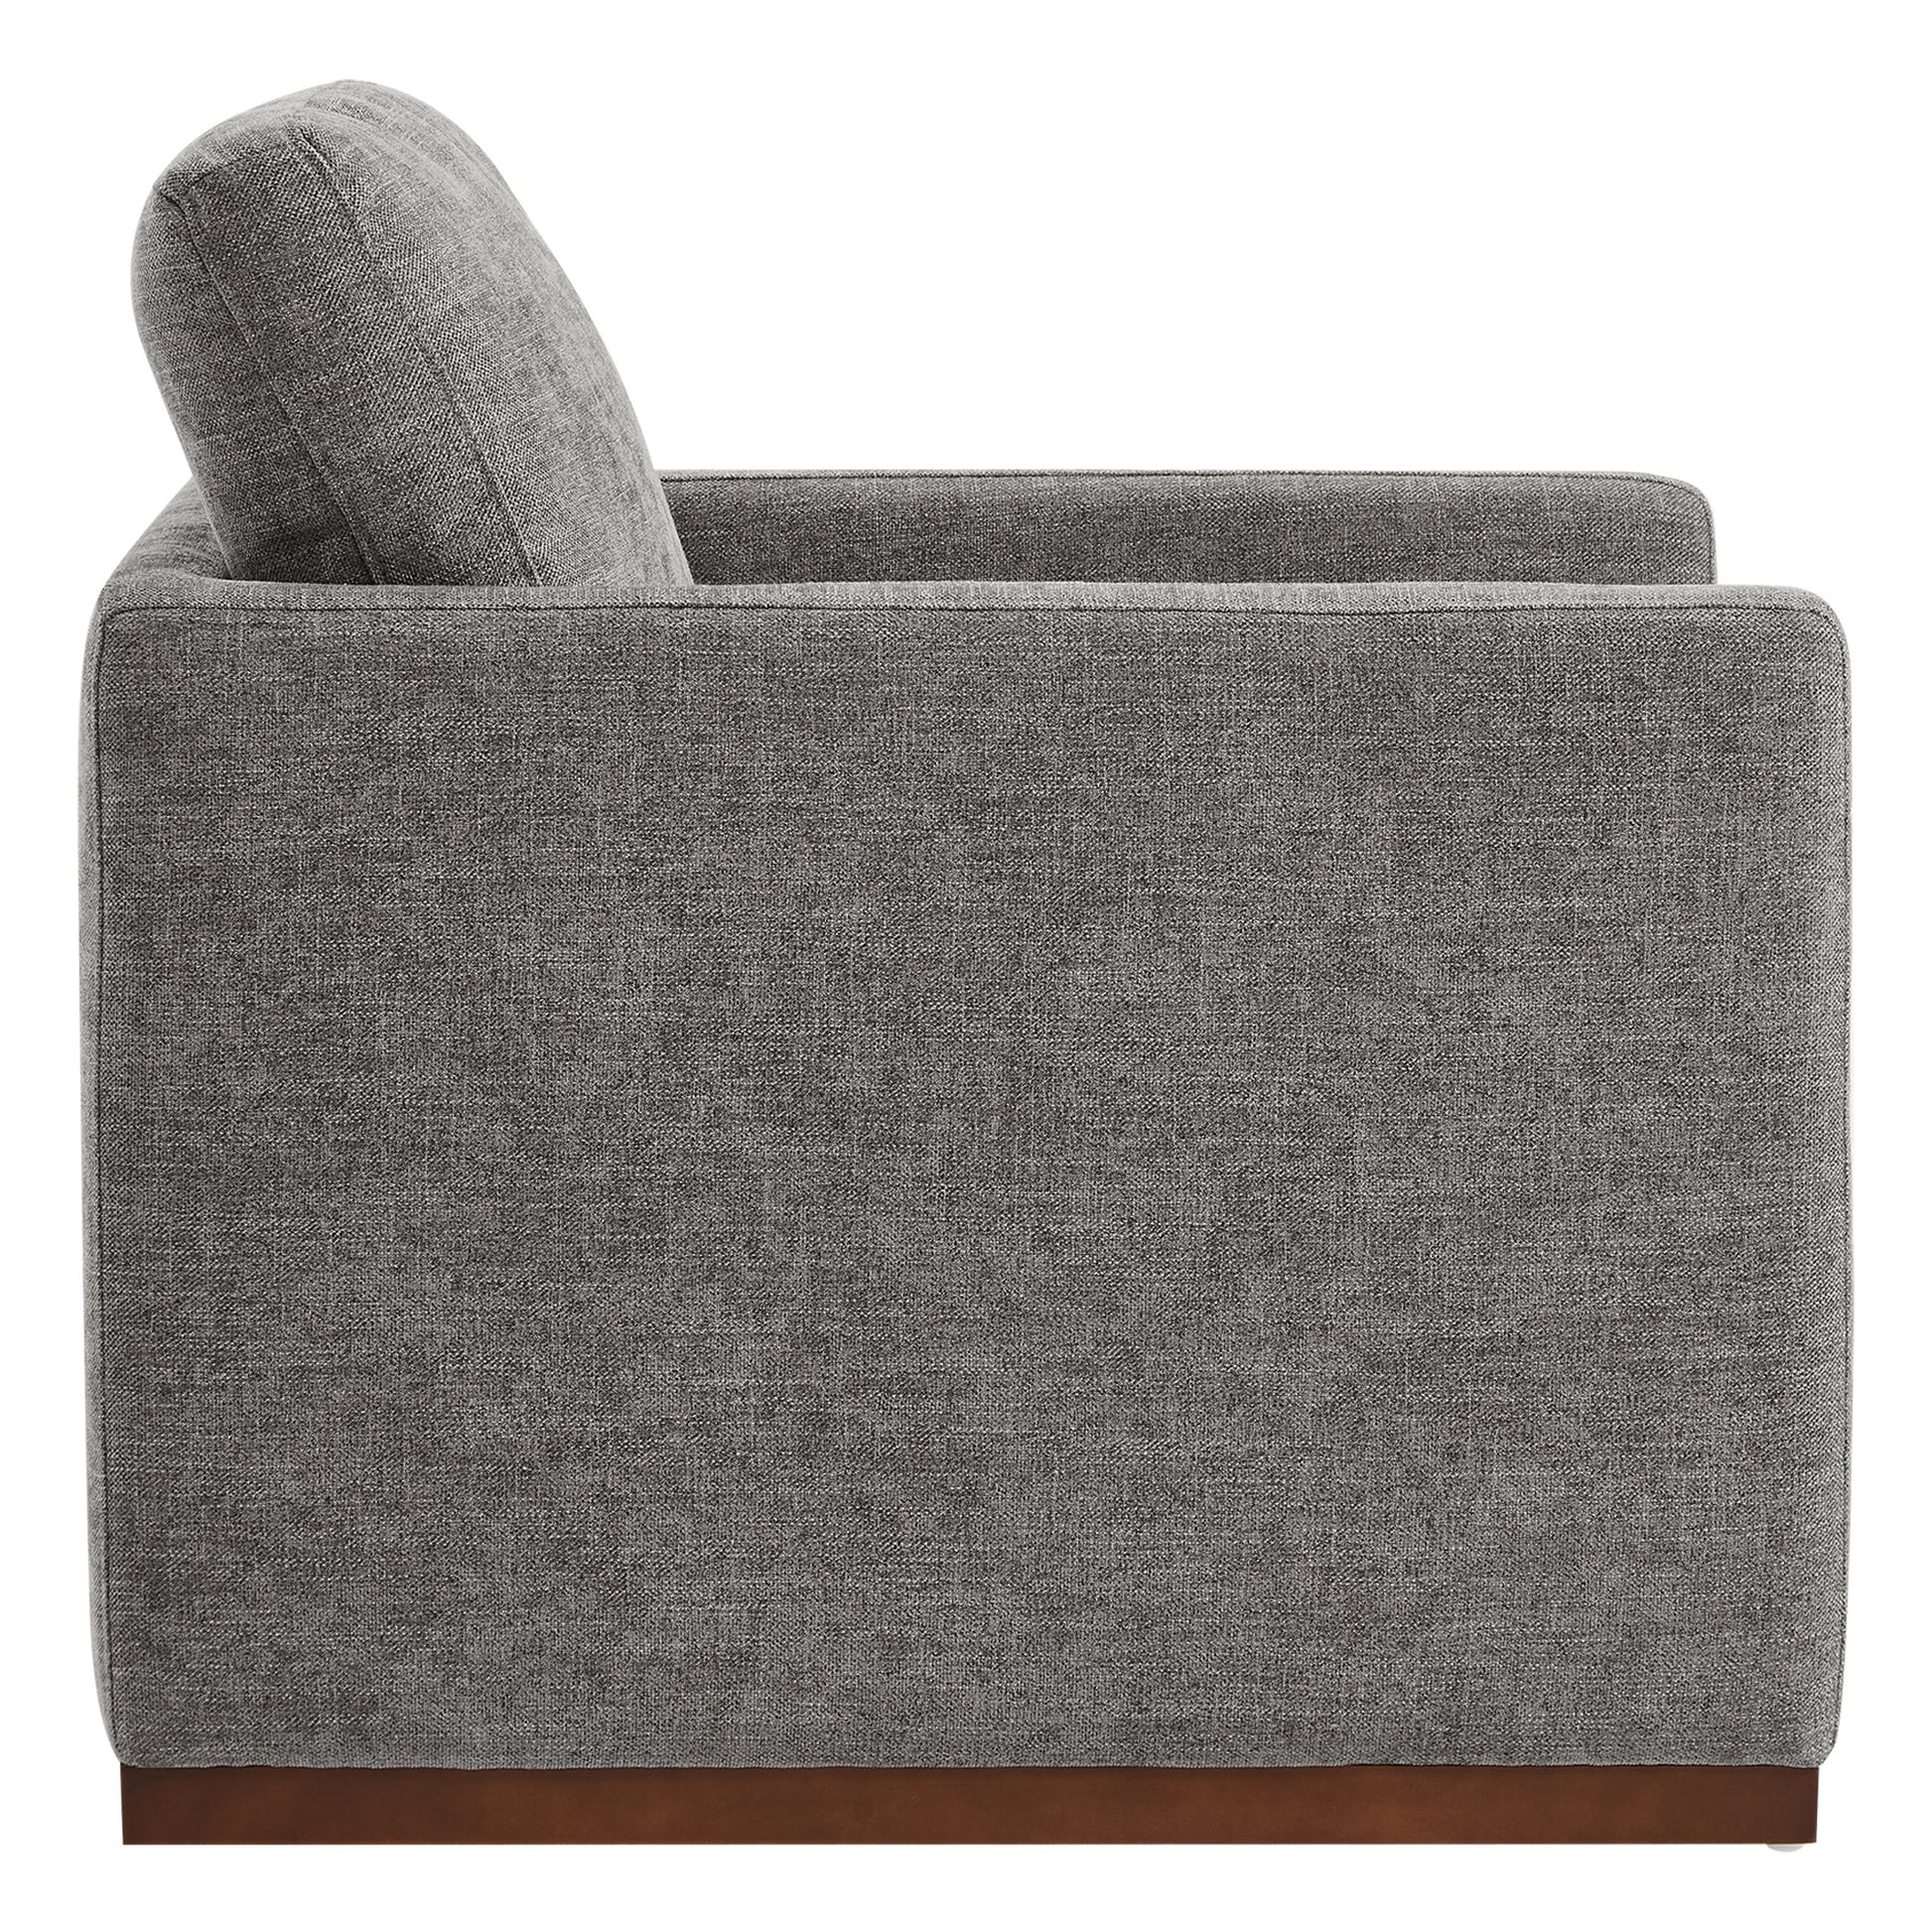 CHITA LIVING-Henry Modern Swivel Accent Chair-Accent Chair-Fabric-Fossil Grey-